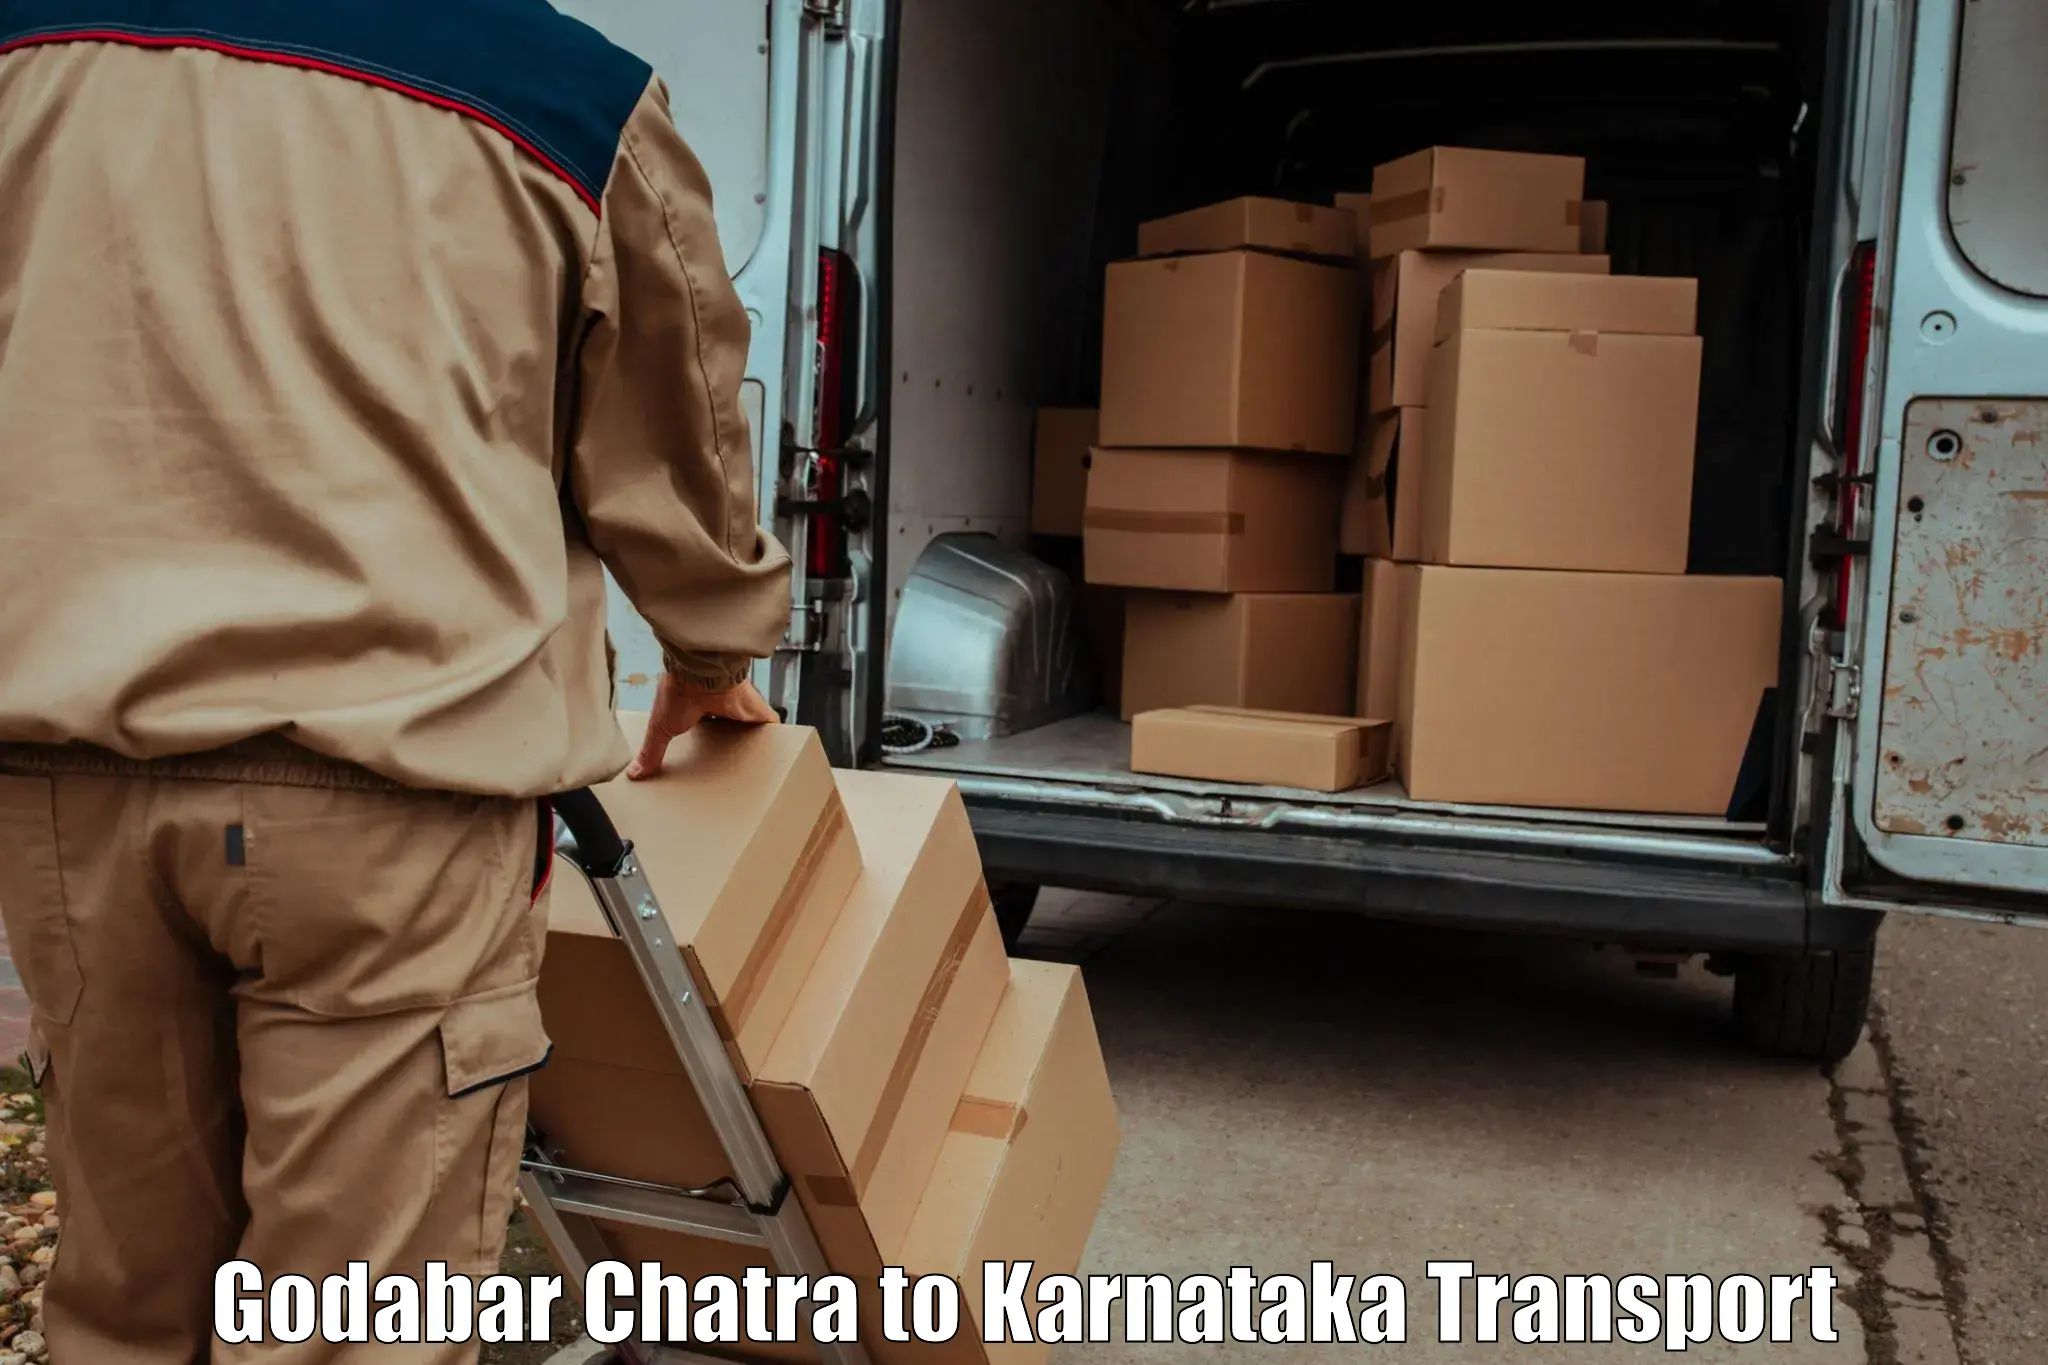 Goods delivery service Godabar Chatra to Bangalore